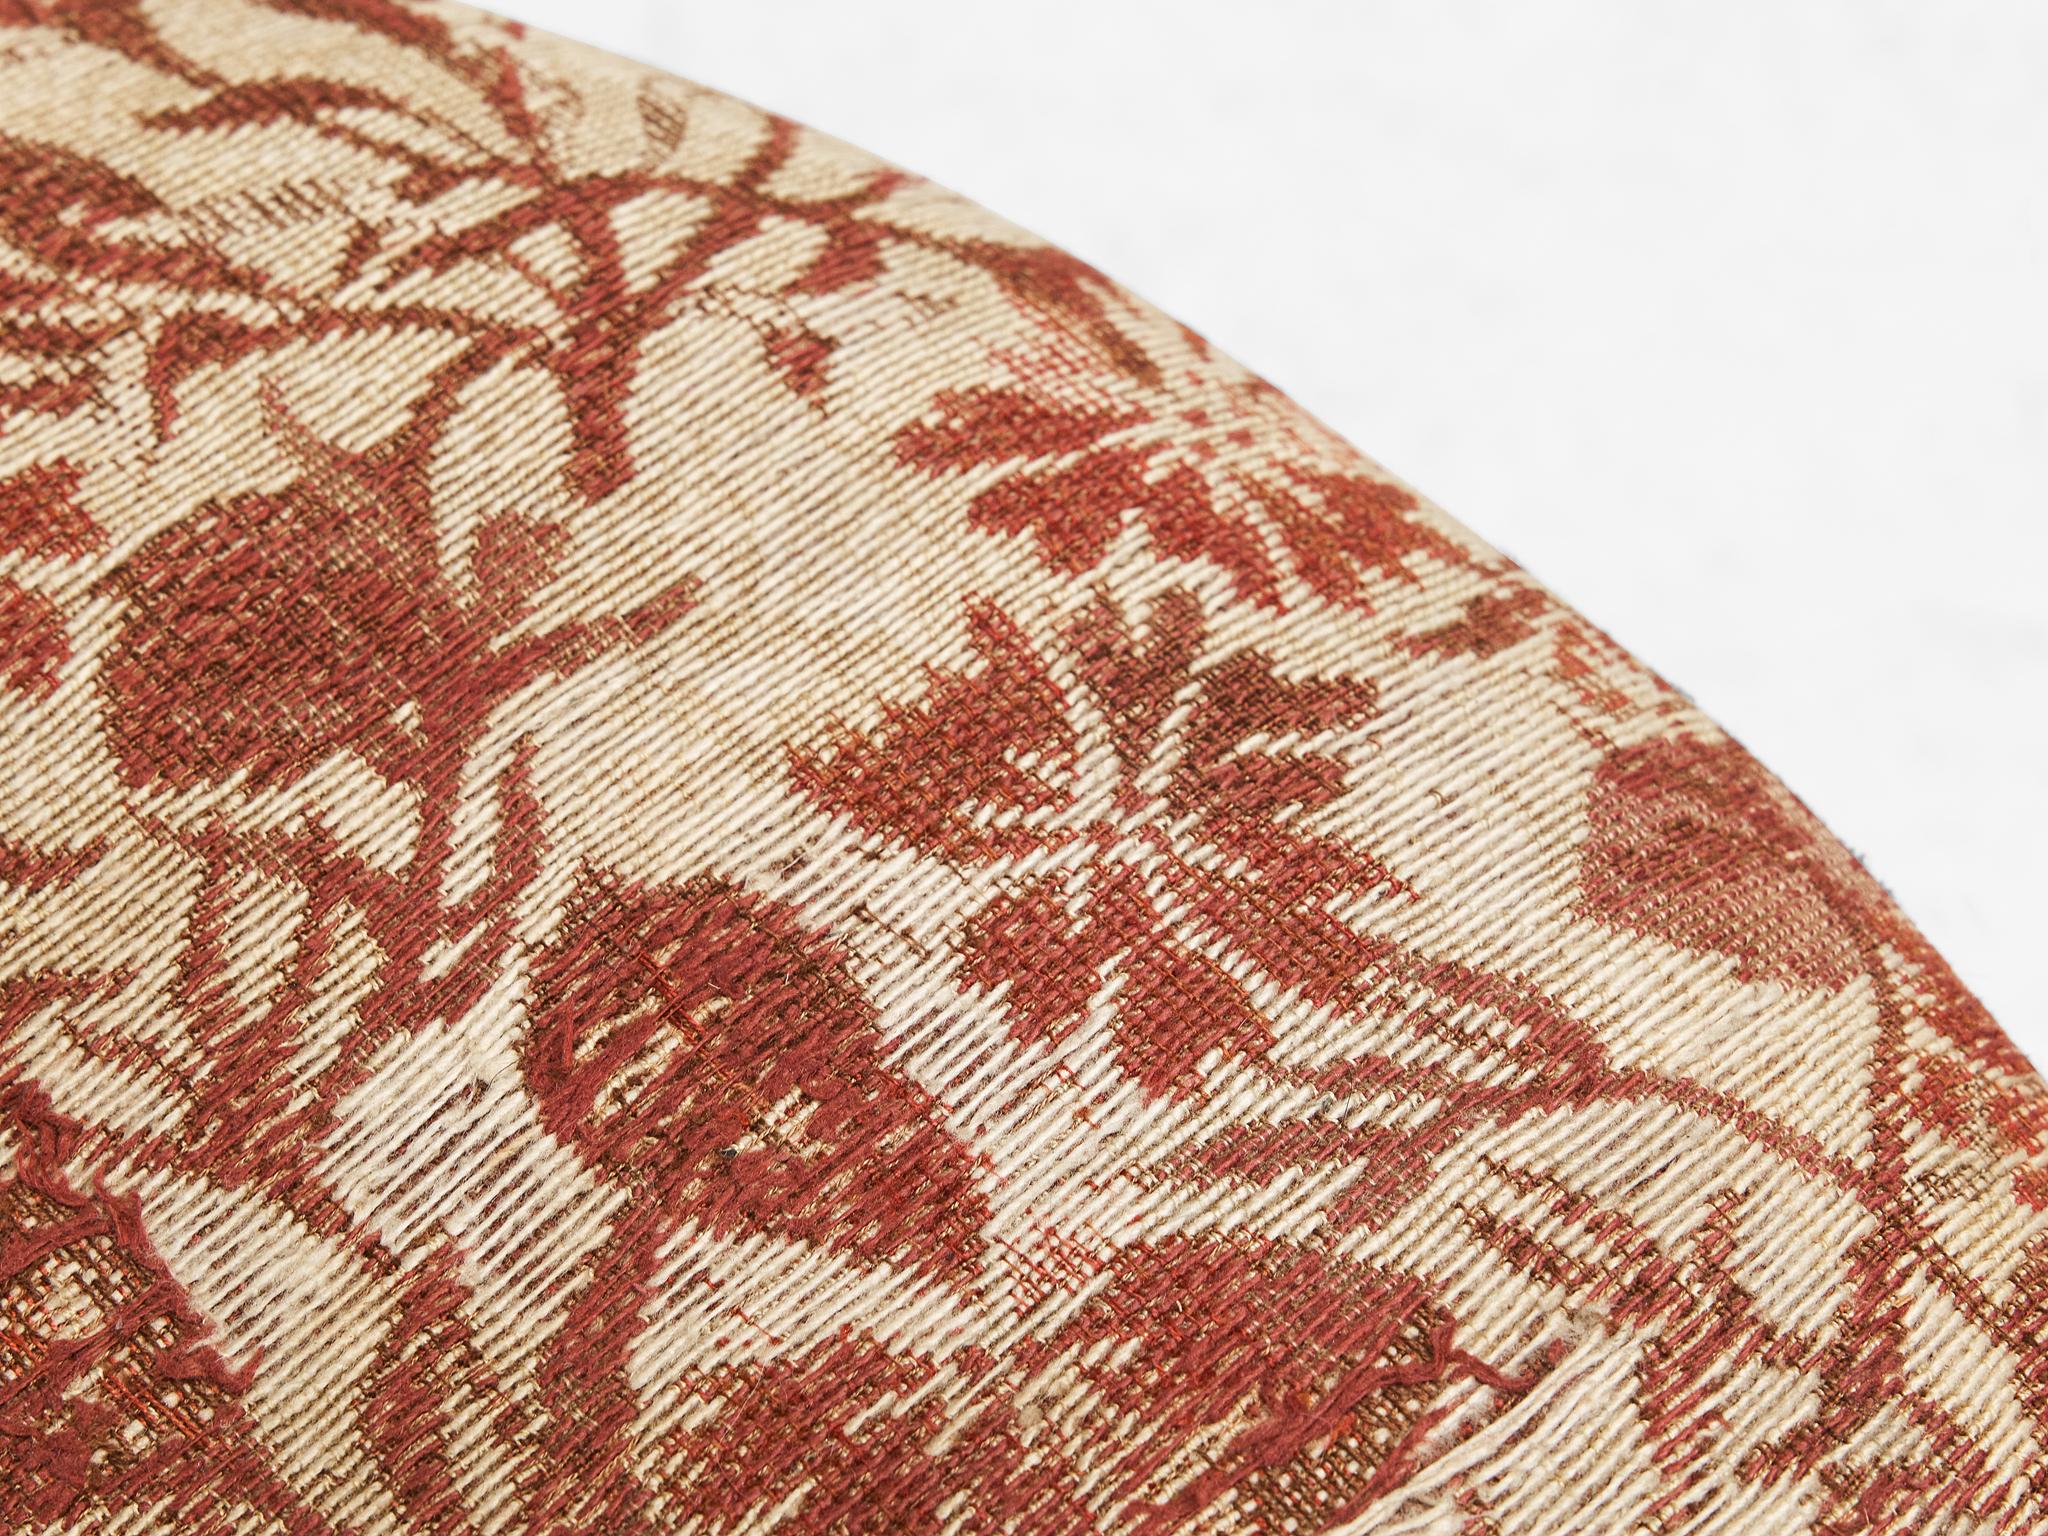 Fabric Jindrich Halabala Stool in Decorative Upholstery  For Sale